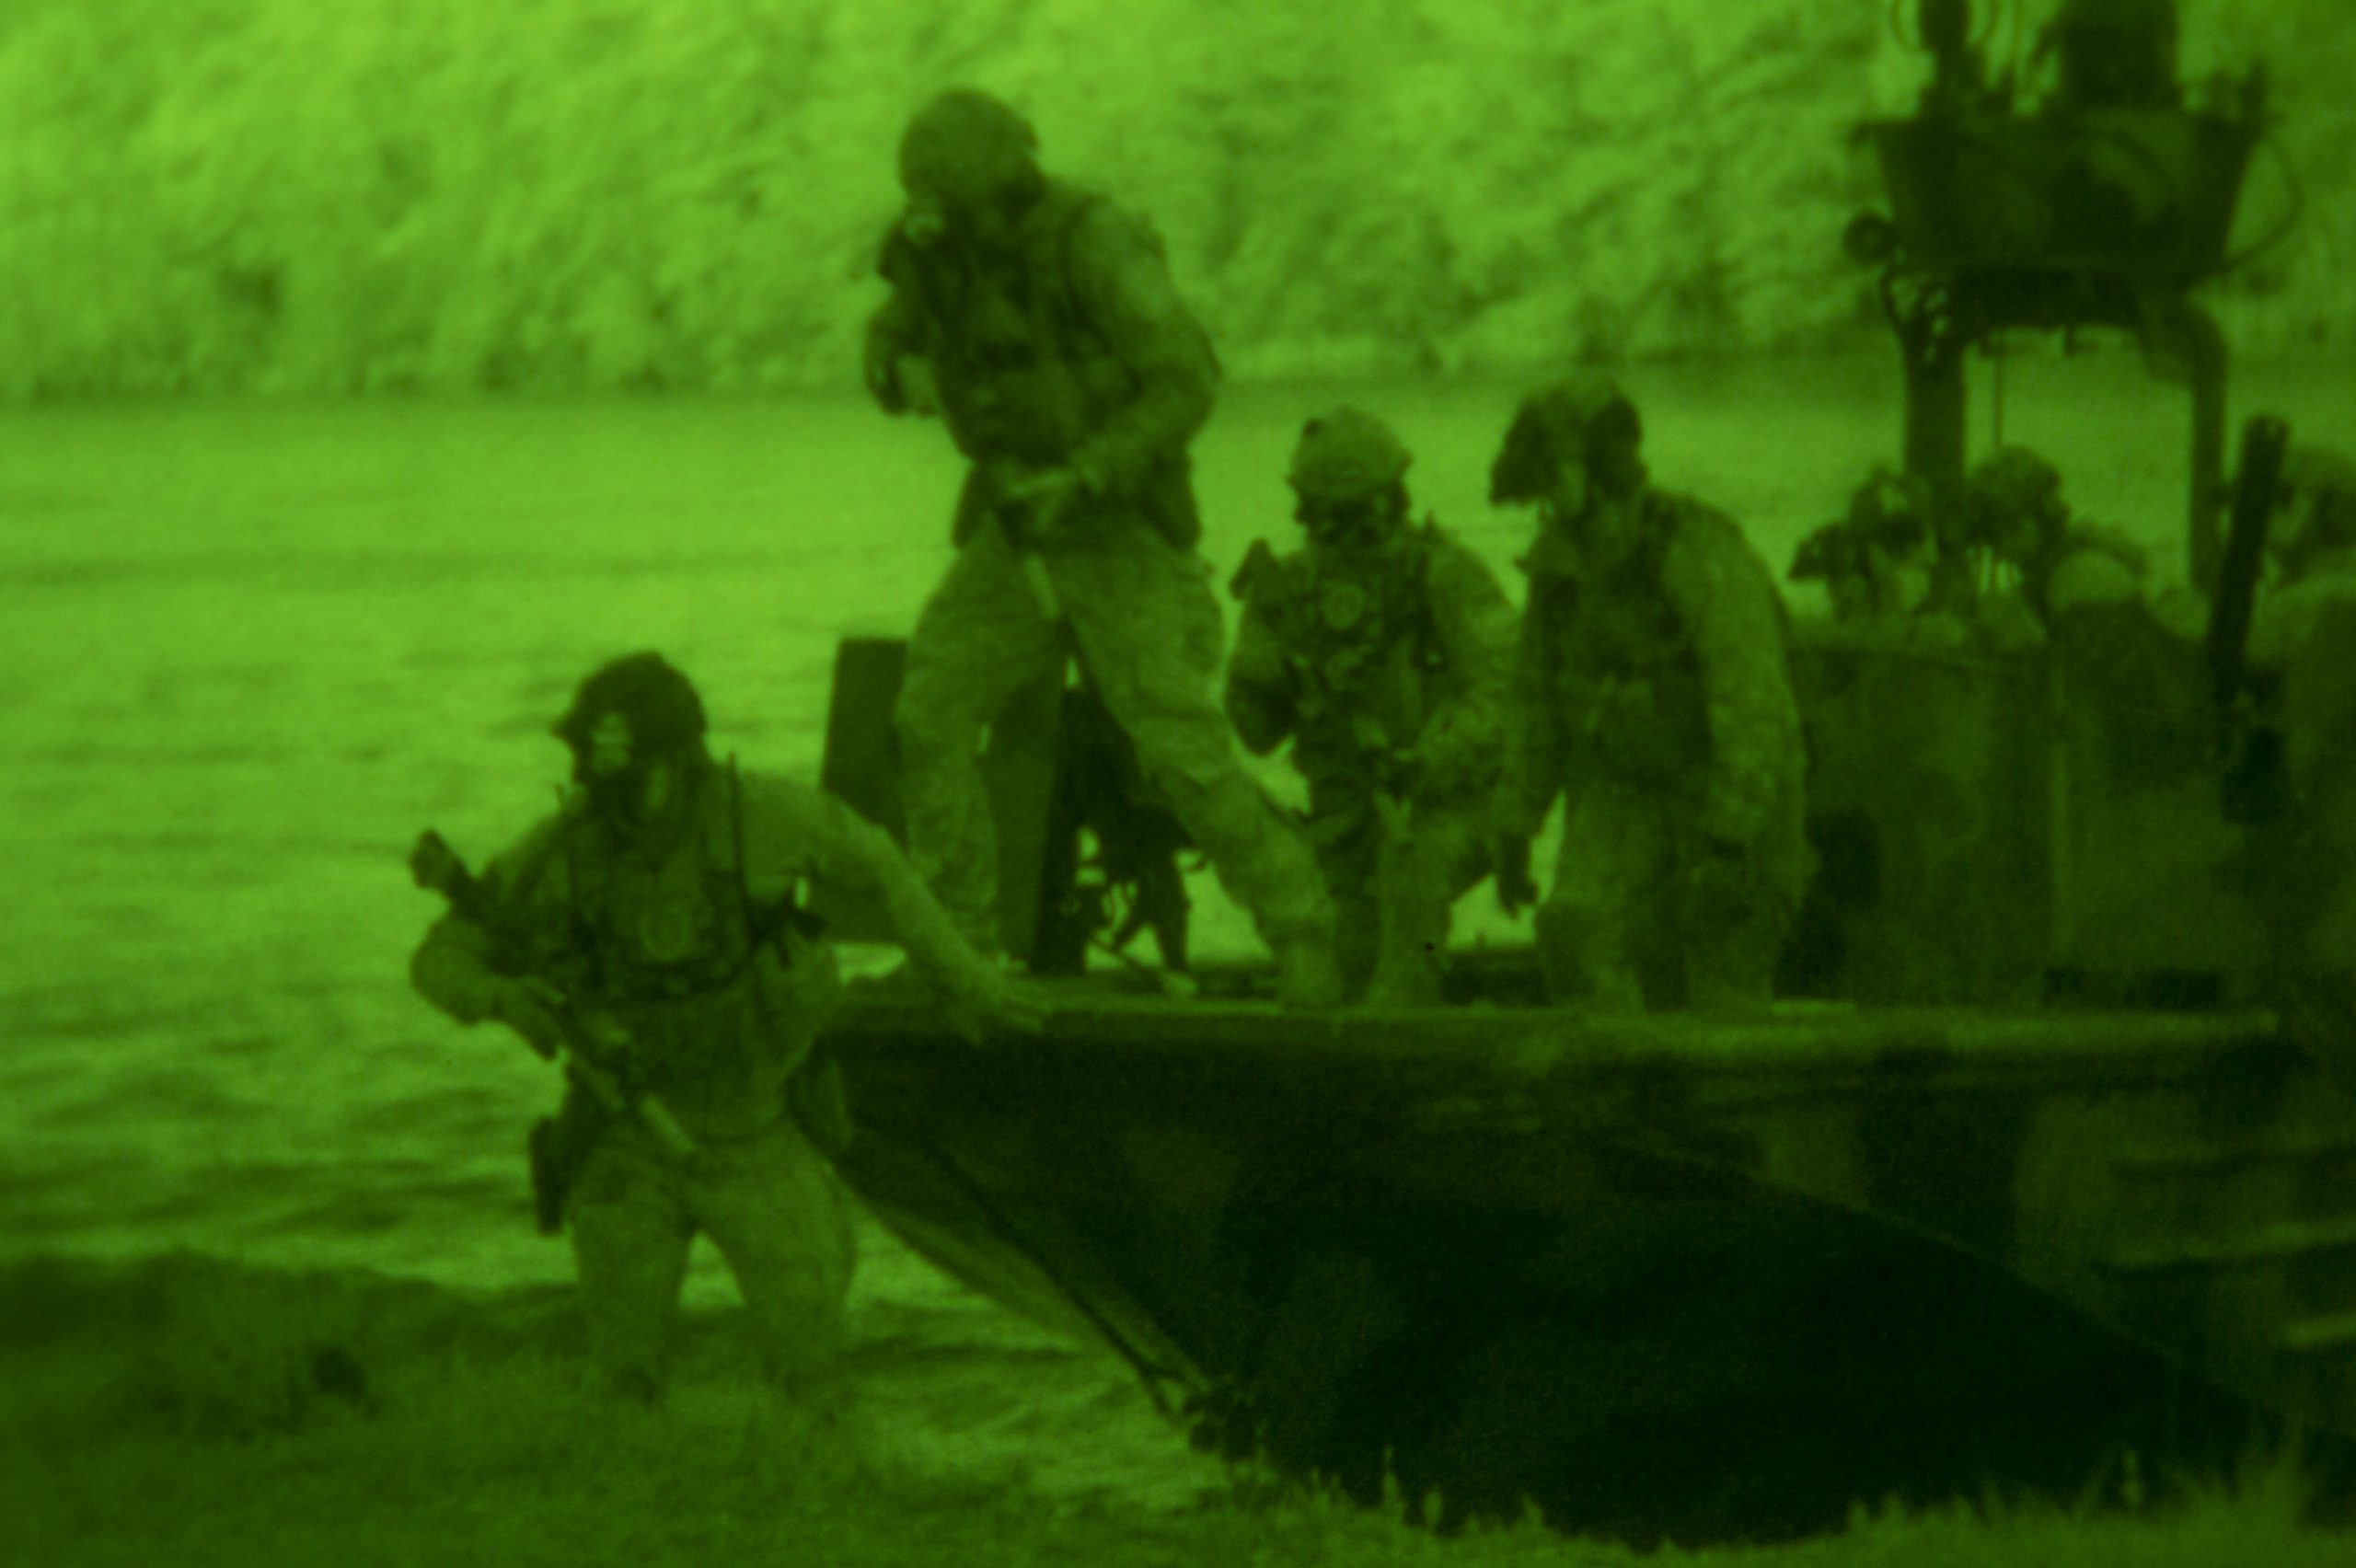 Navy SEALs participate in a night exercise at the John C. Stennis Space Center, Miss., May 4, 2017. The exercise is part of TRIDENT 17, Naval Special Warfare's premiere joint training event that encompasses several Special Operations Forces and conventional military participants, as well as partner nations and partner agencies. Navy photo by Petty Officer 2nd Class Matthew Murch. "This capital expenditure fuels the current fight, but it must also result in long-term competitive advantage,” West told the House panel during a hearing on the fiscal year 2019 budget request for special operations forces and Socom. -